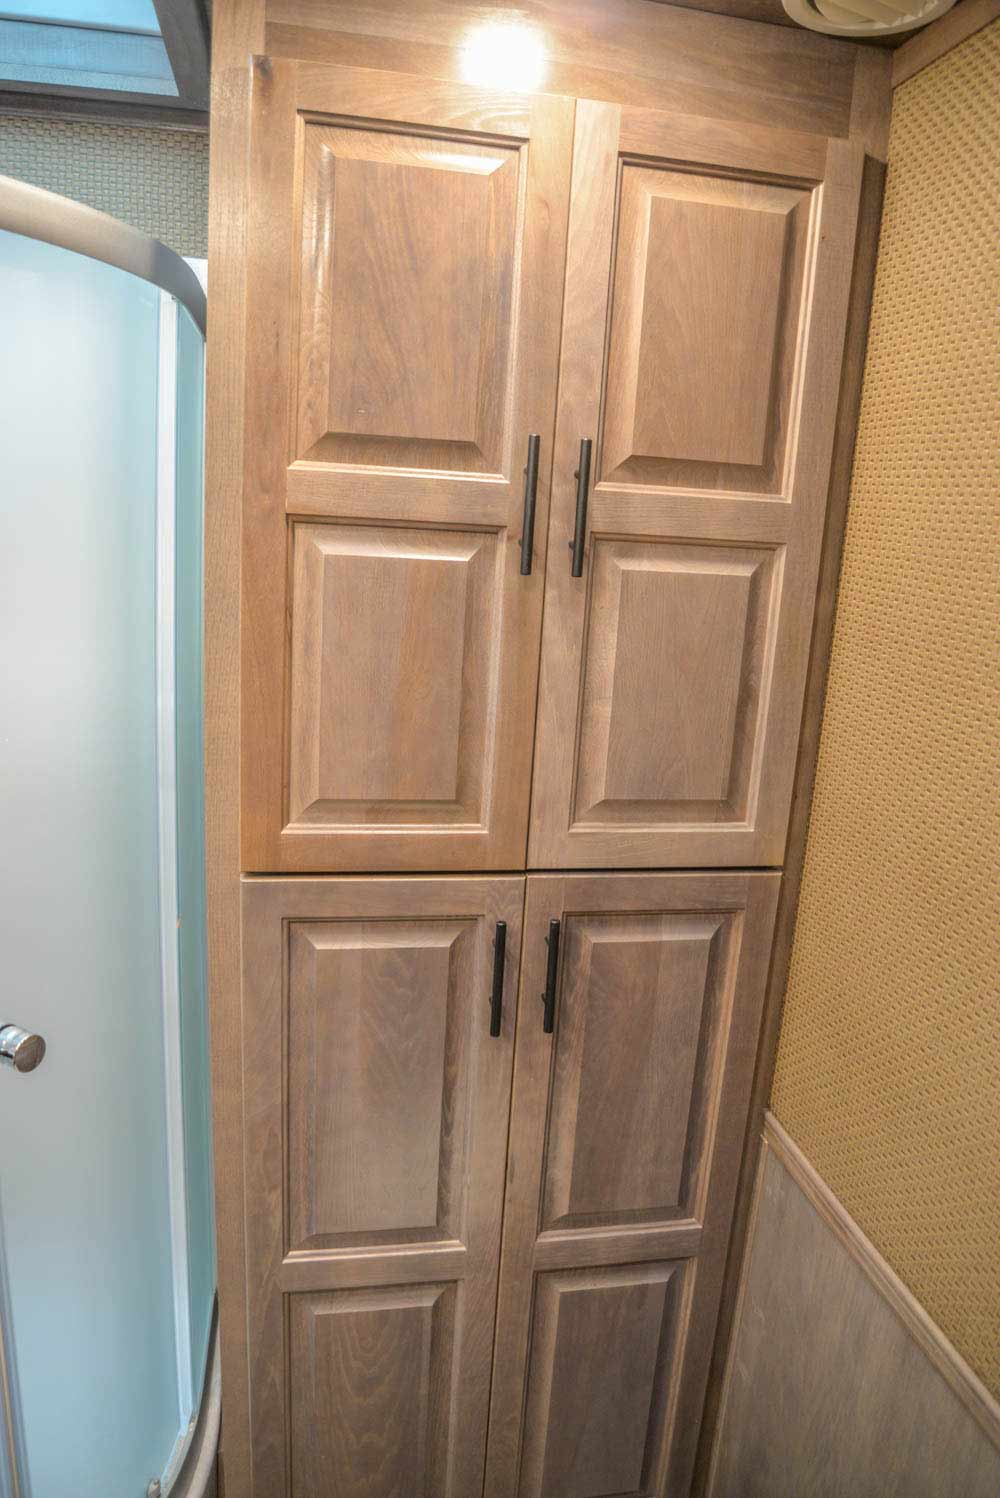 Cabinets in Bathroom in BH8X23T2S Bighorn Edition Horse Trailer | Lakota Trailers